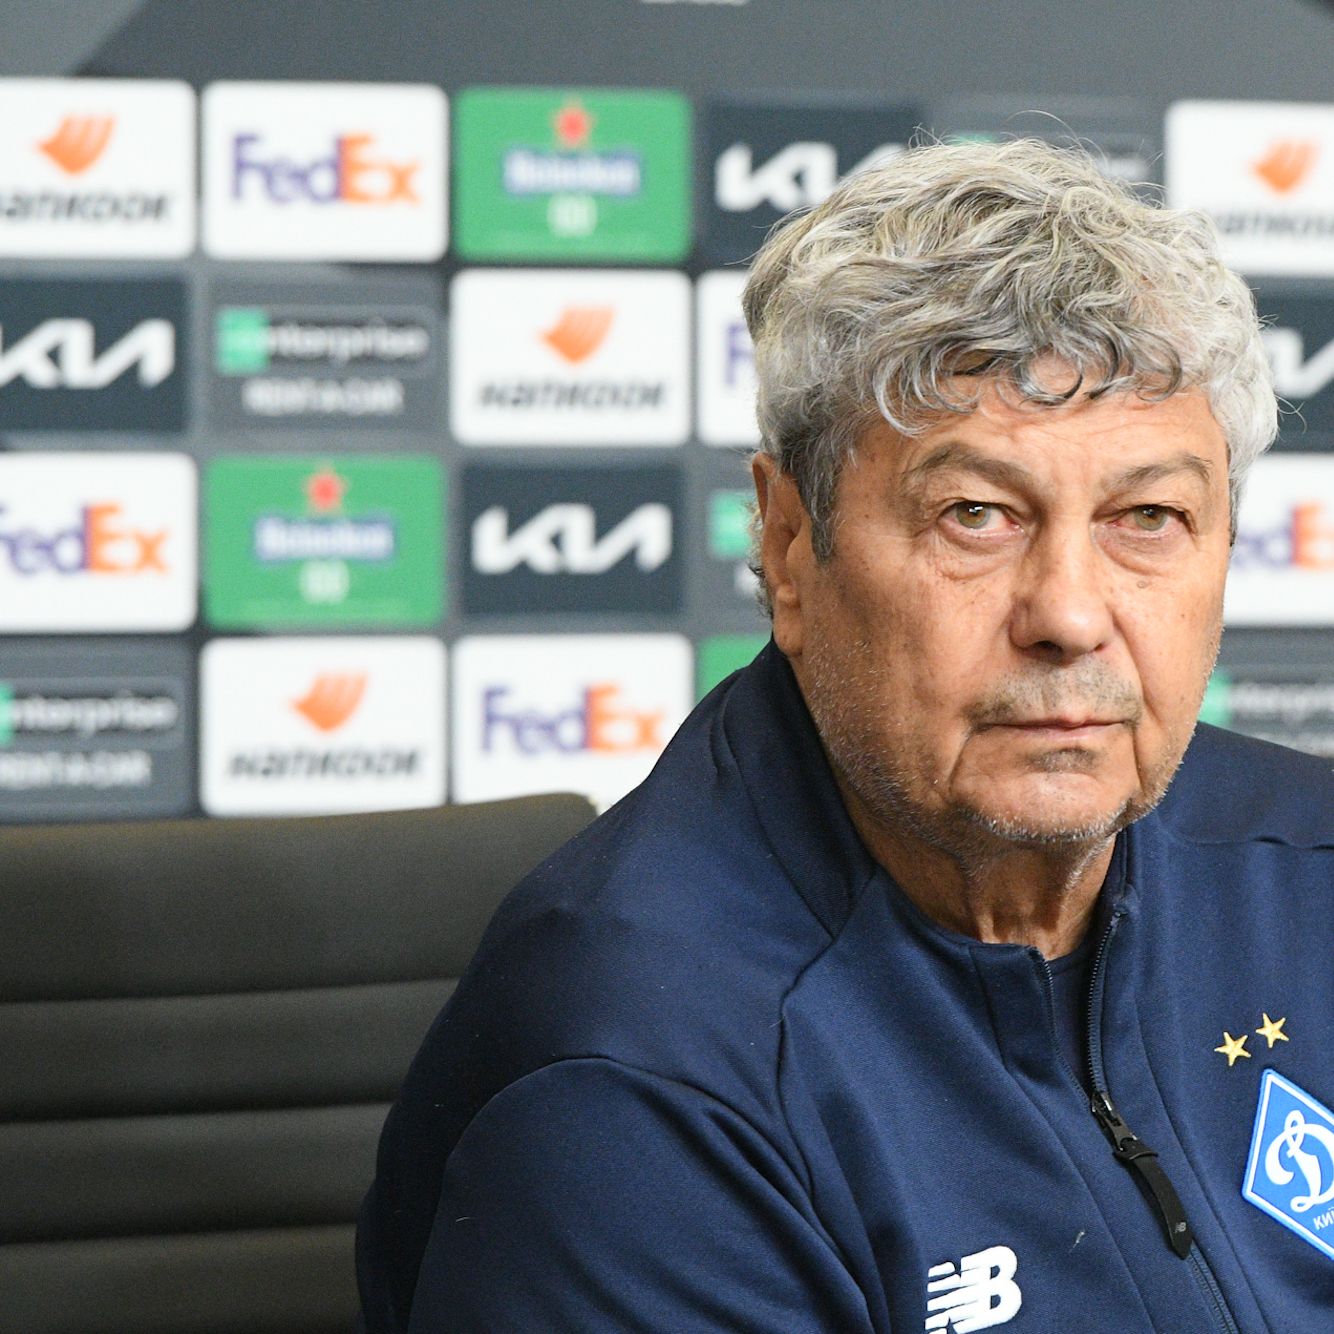 Mircea Lucescu: “It’s important to keep balance between attack and defense, considering that Brugge play very aggressive attacking football”